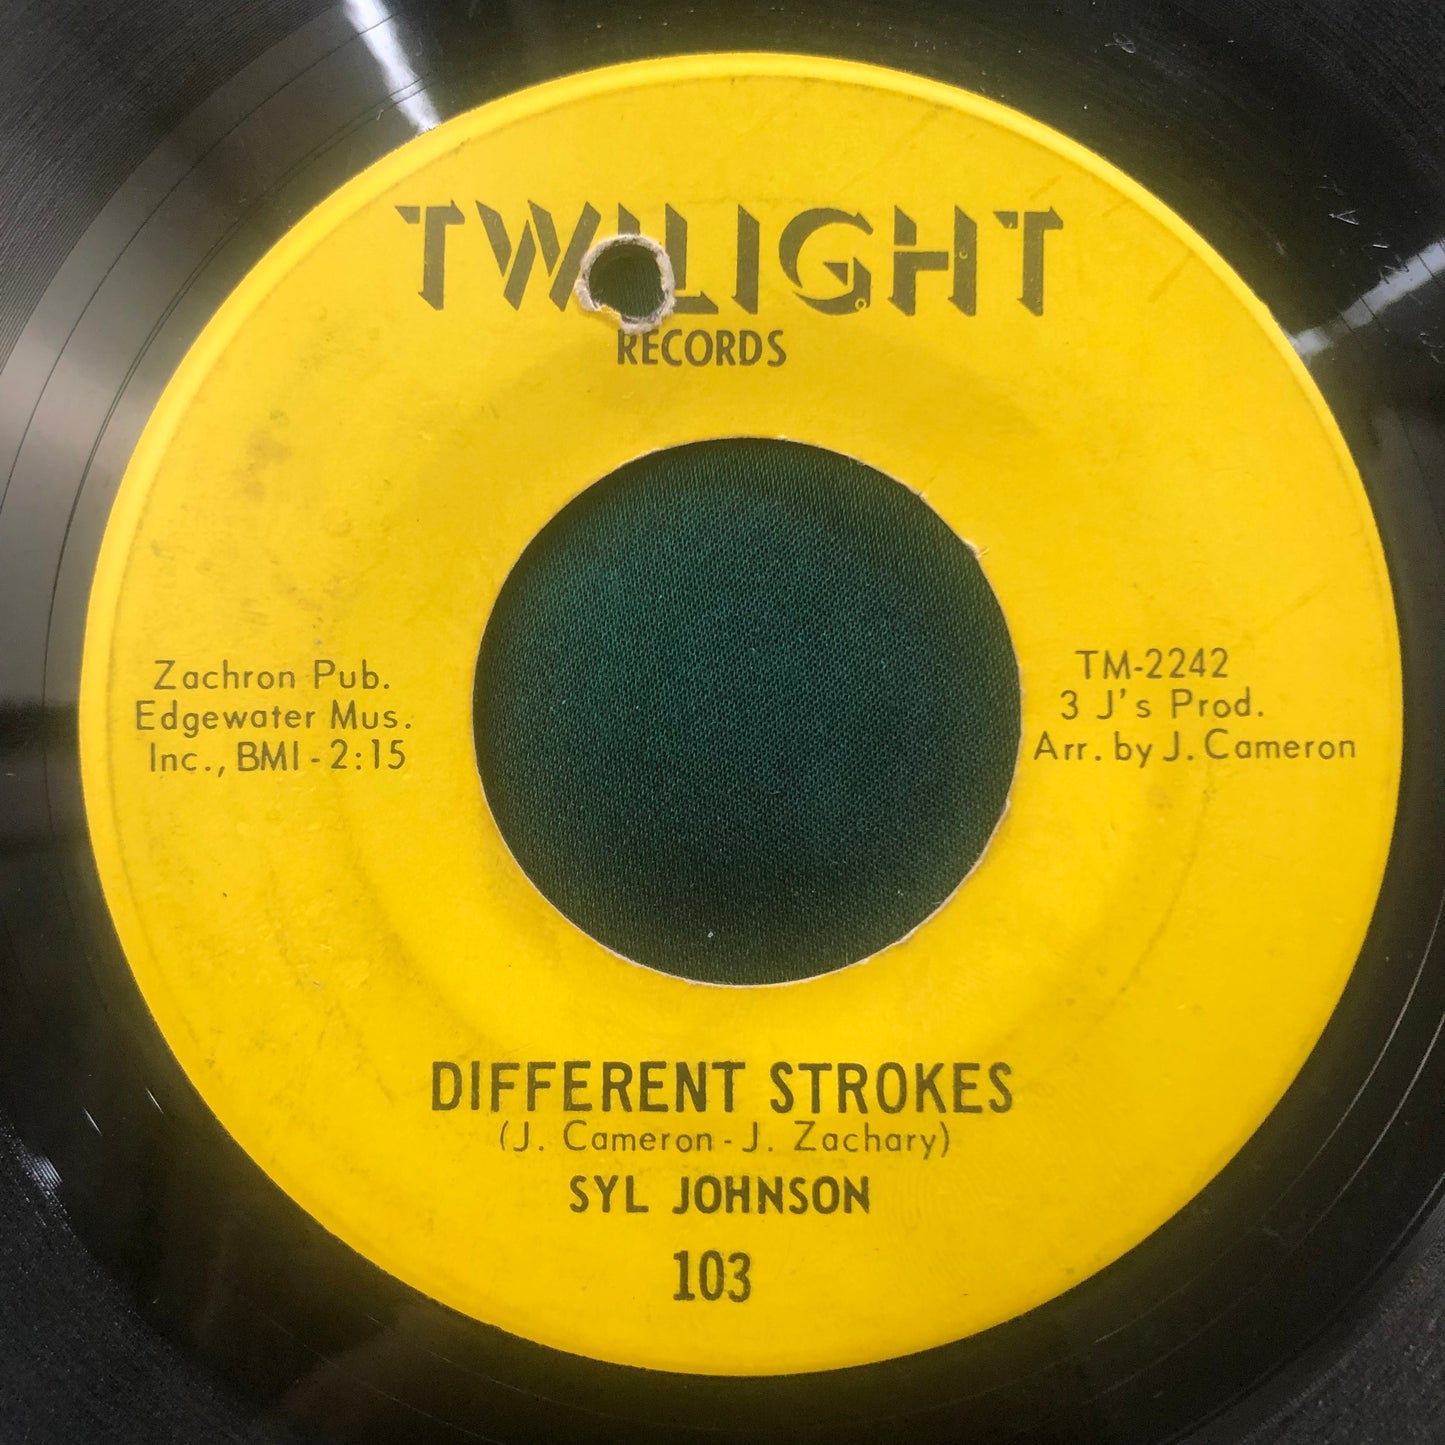 Syl Johnson - Sorry Bout Dat / Different Strokes 1967 Twilight Records Funk 45